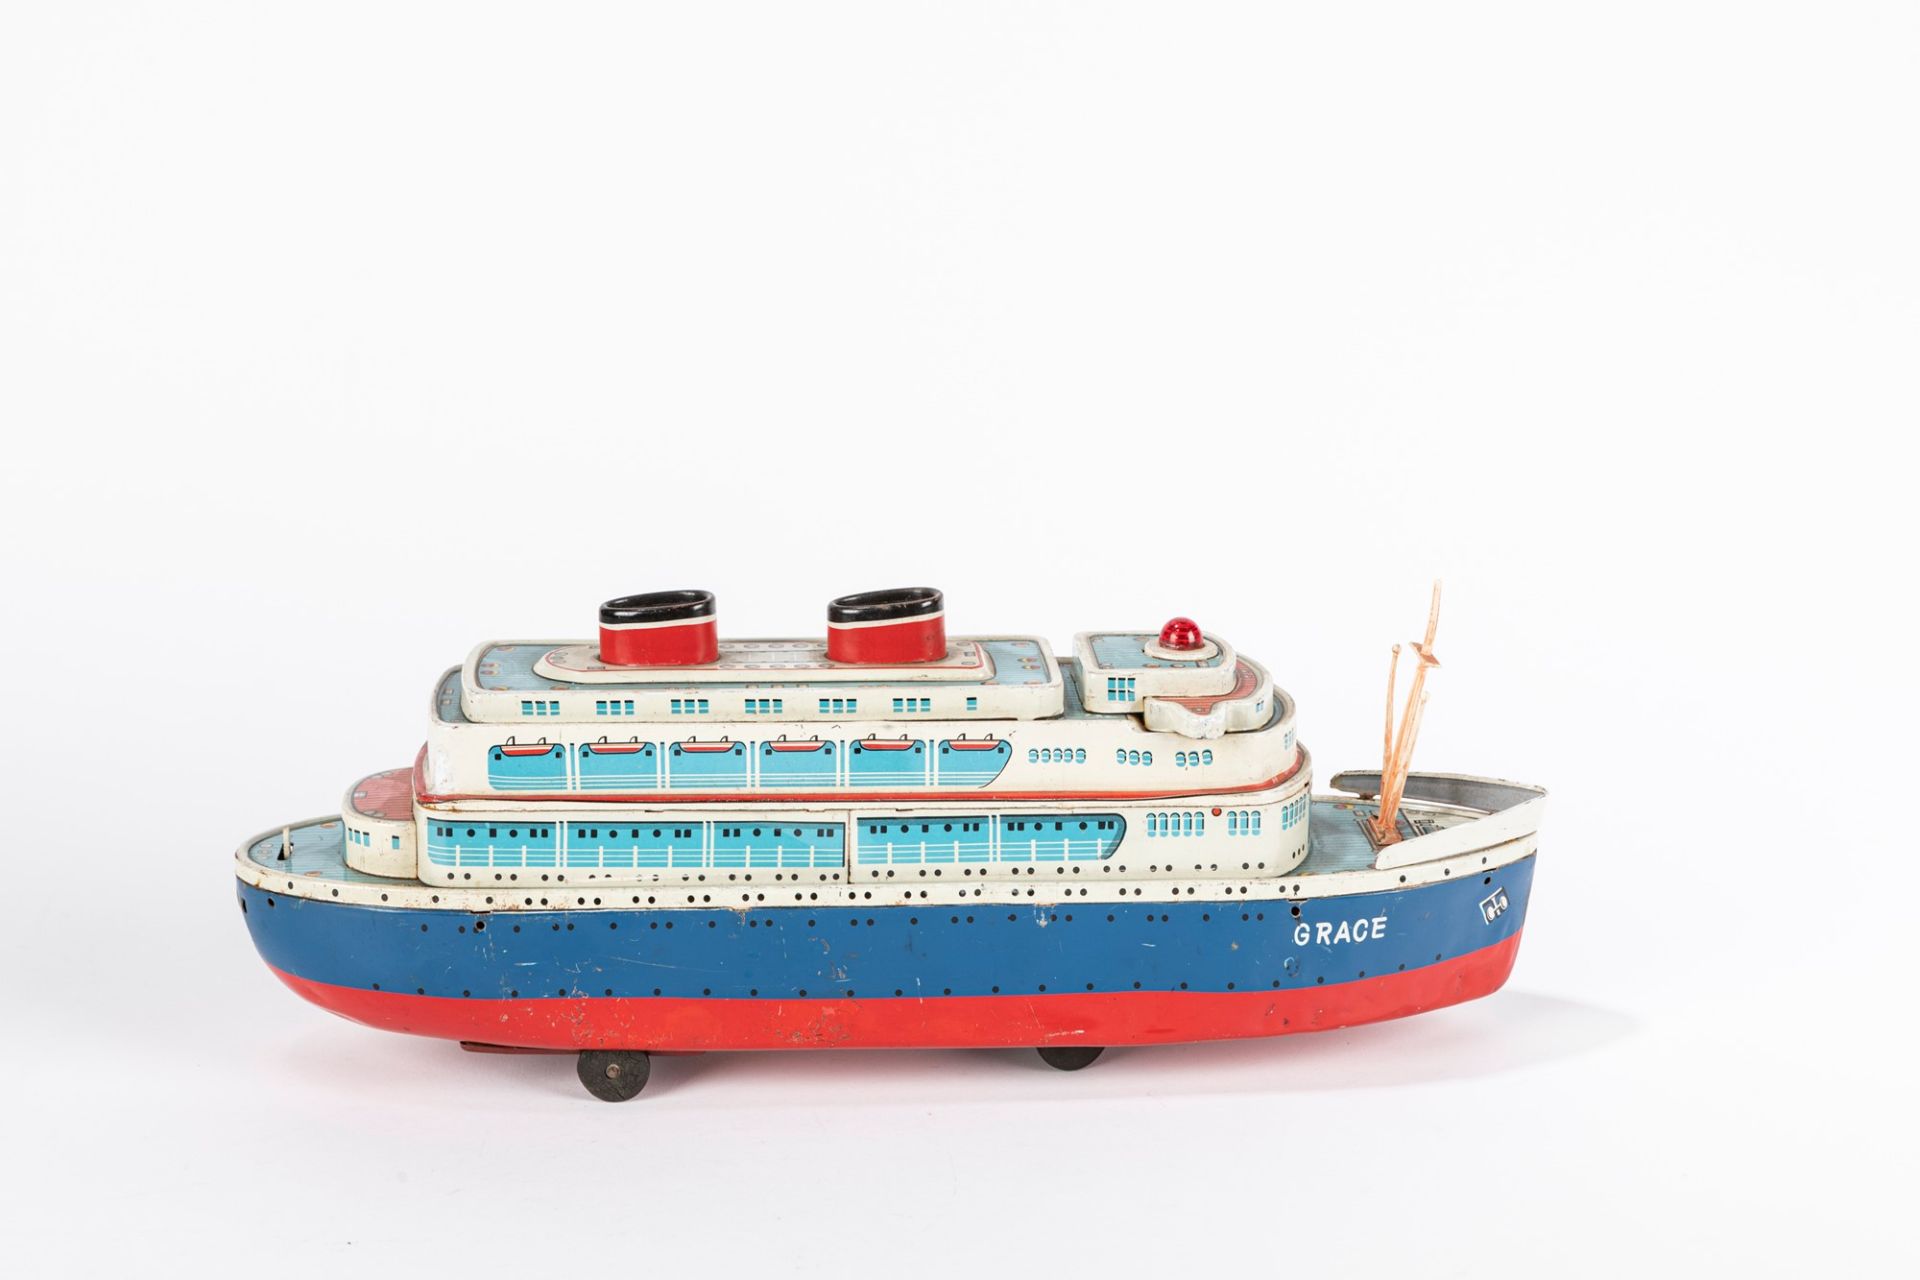 Modern Toys - Tabletop Grace Cruise Ship - Image 2 of 2